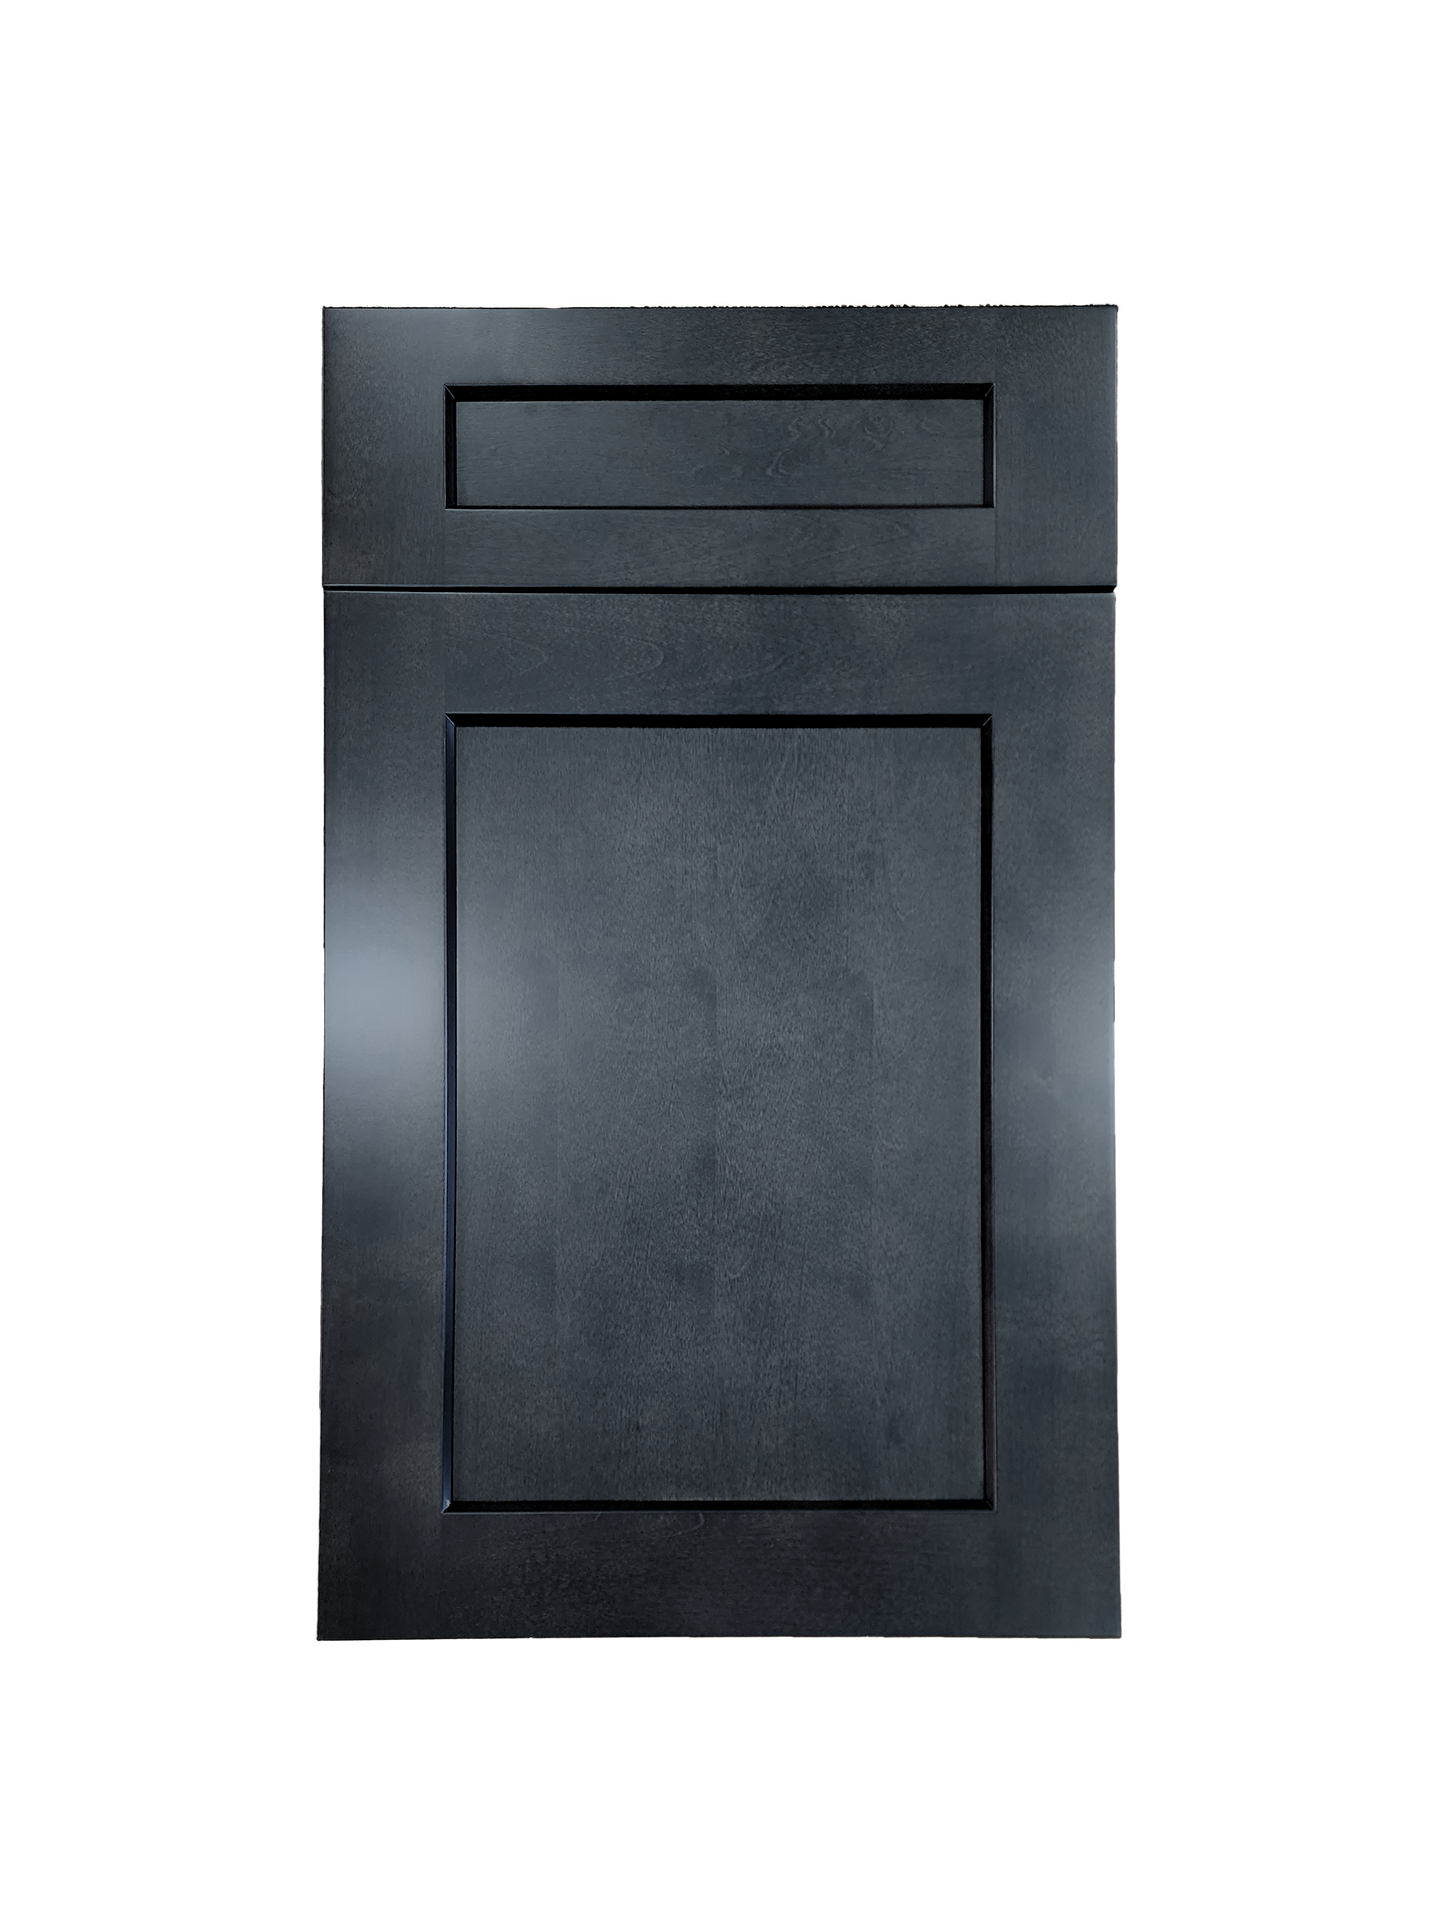 Stormy Grey Wall Refrigerator Cabinet 36 inches wide 24 inches deep 18 inches tall with Stormy Grey box and Stormy Grey doors